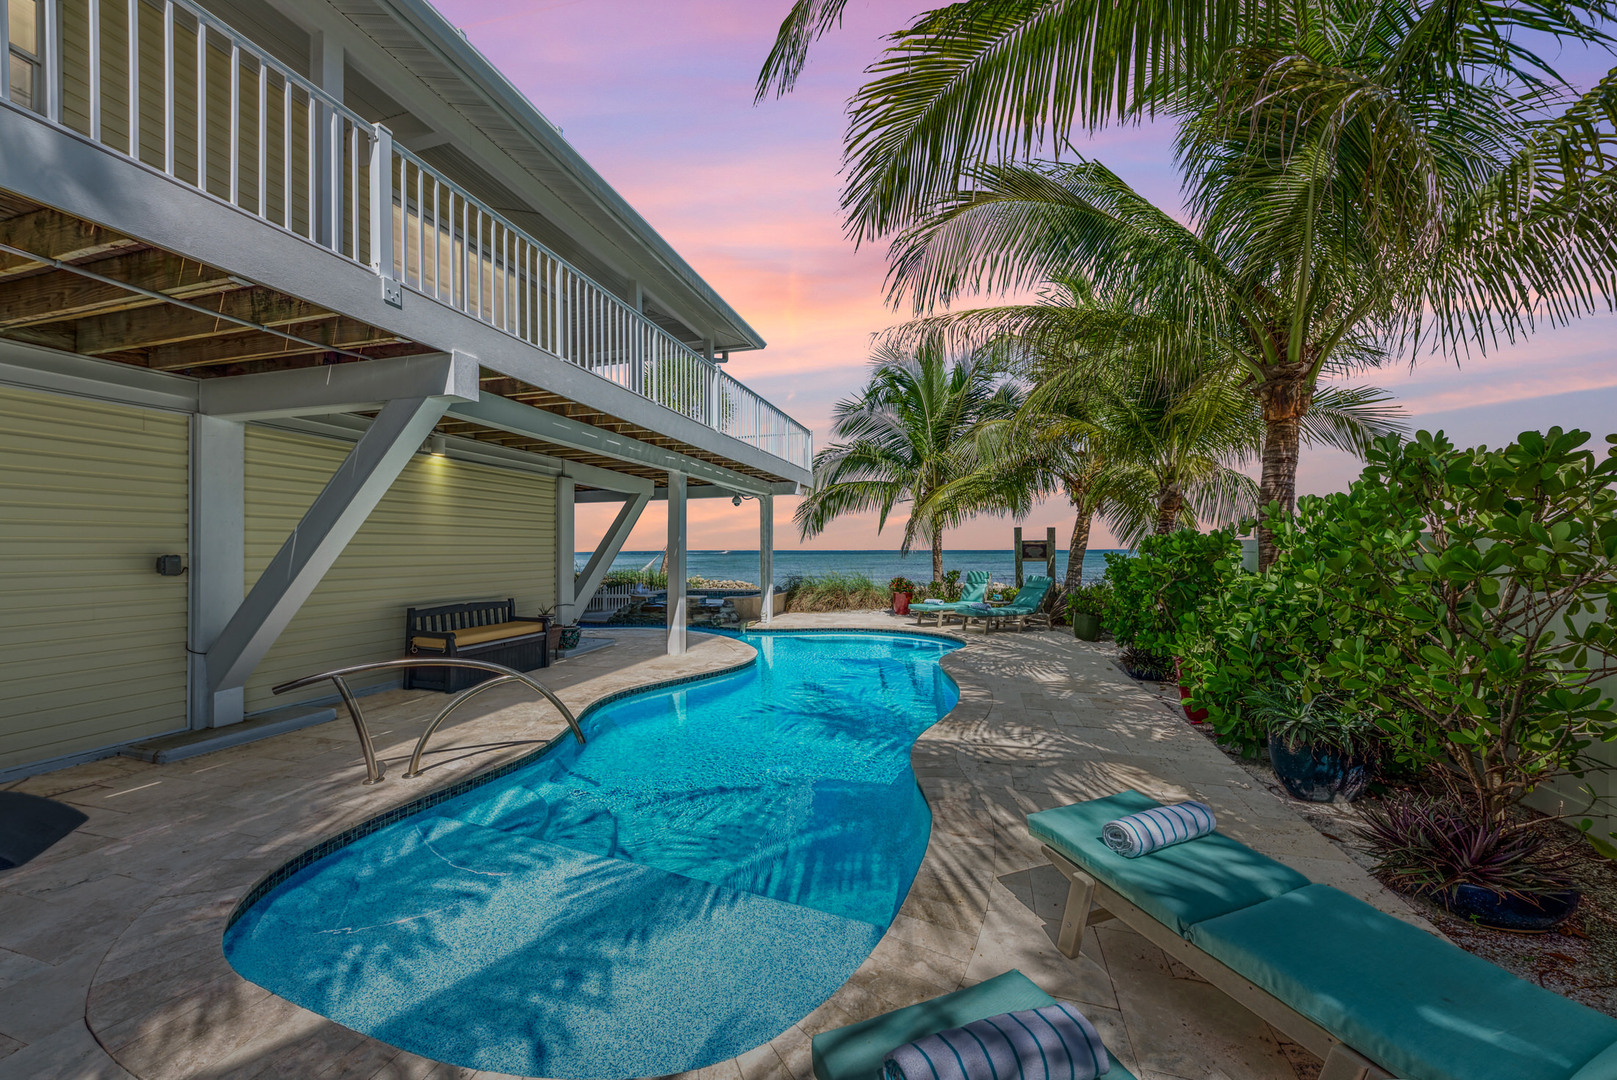 At our Anna Maria island vacation rentals, enjoy pool overlooking the bay at sunset at Dolphin Tales by Anna Maria Life Vacation Rentals